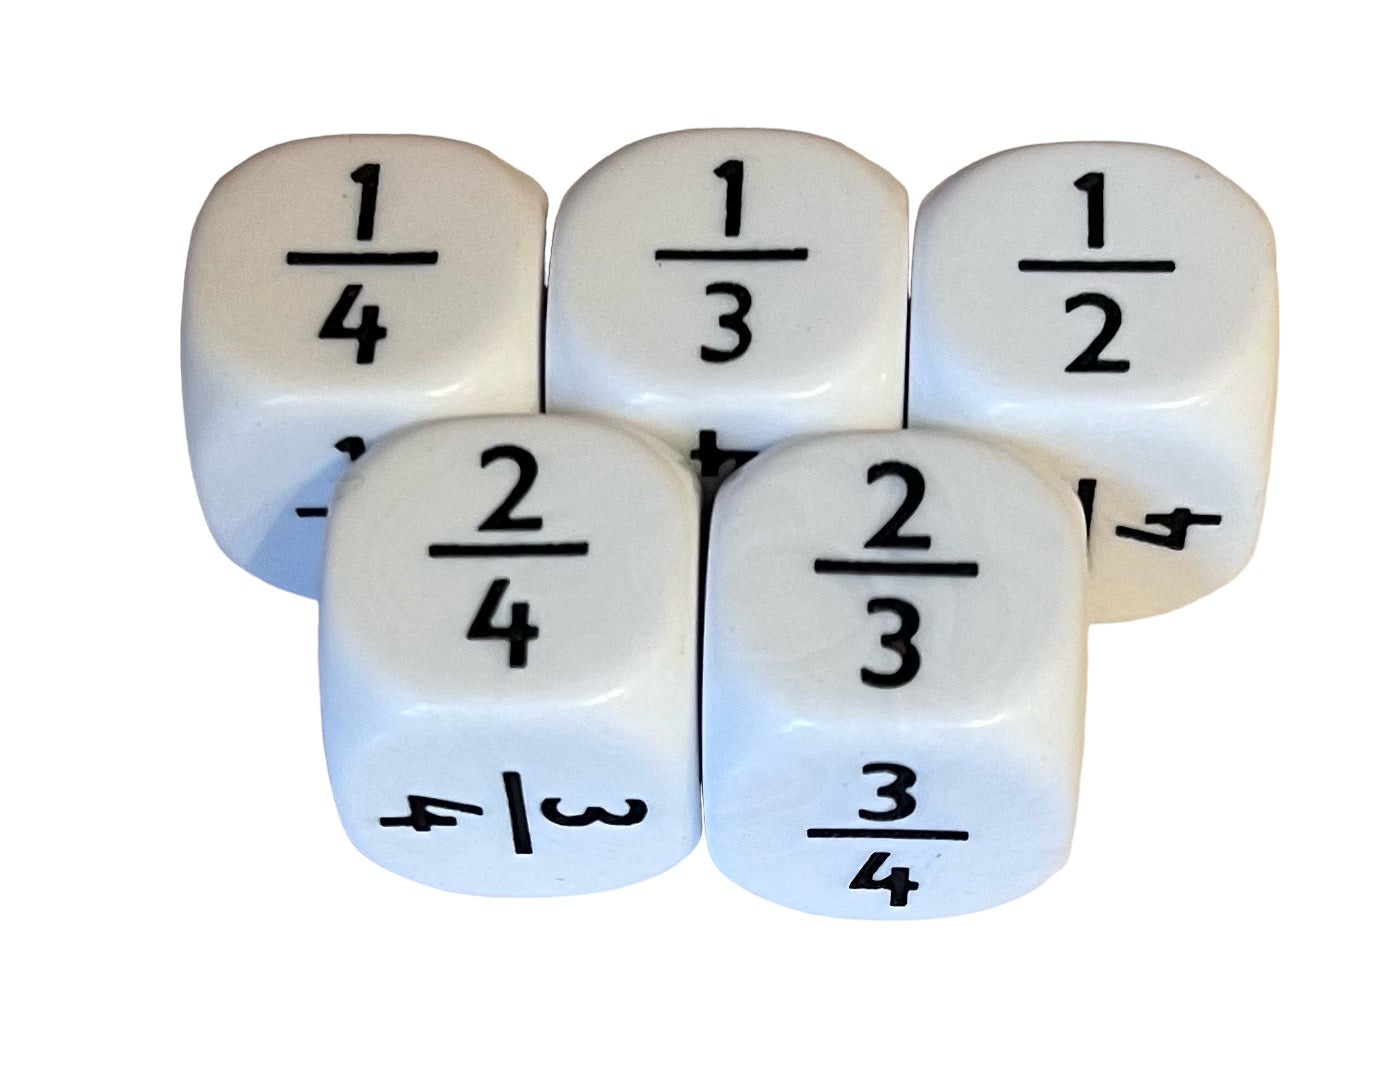 Dice - Large Fractions Dice (1/2, 1/3, 1/4, 2/3, 2/4, 3/4)